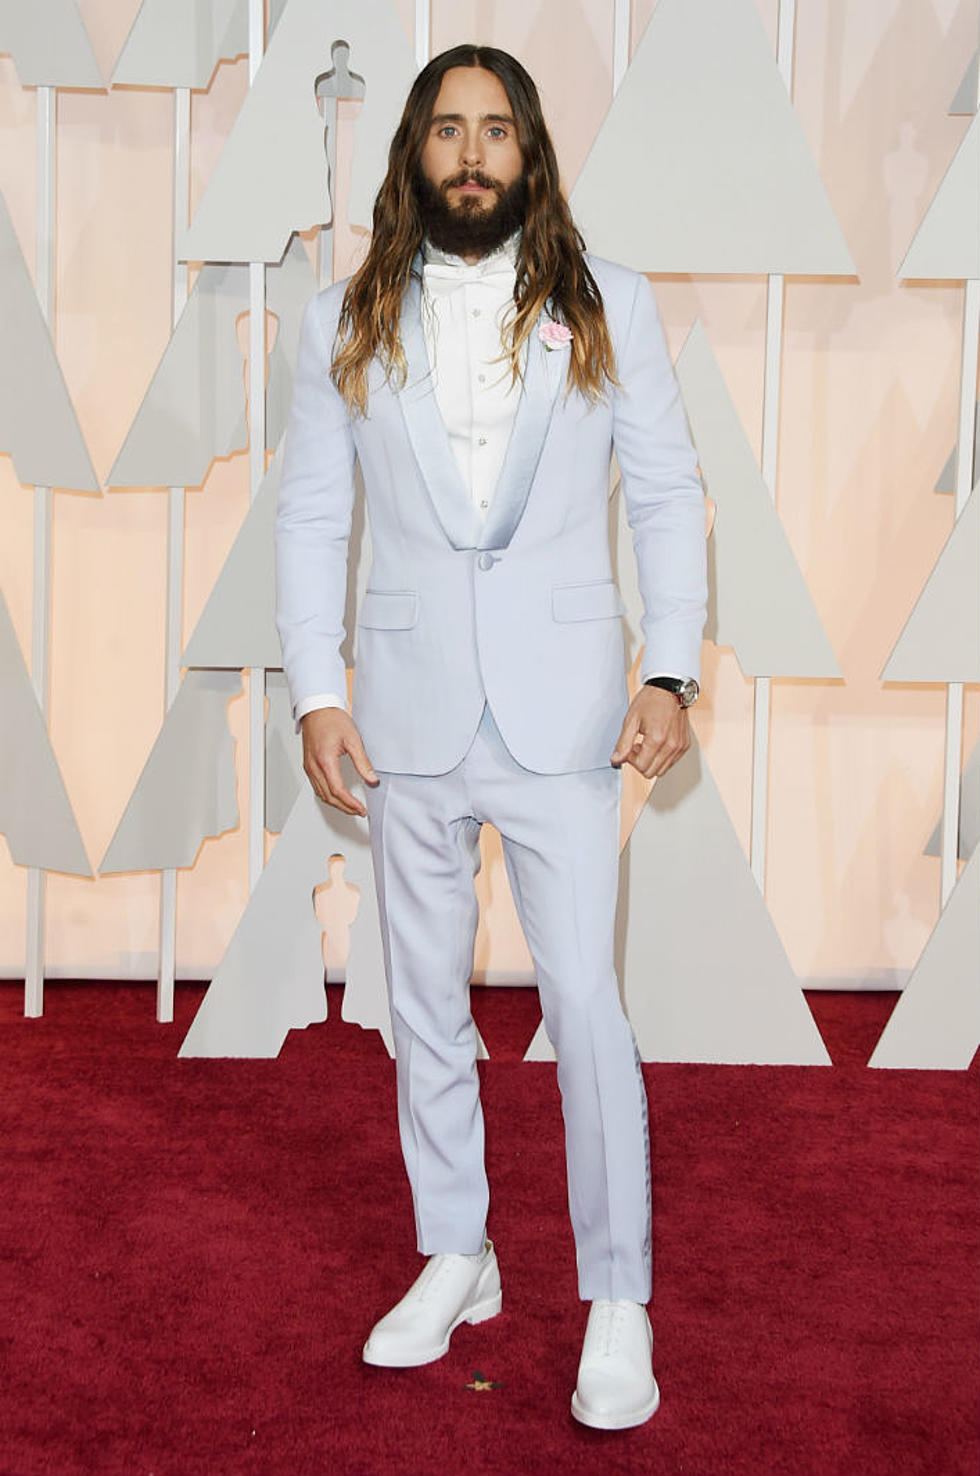 See Actors Who Rocked Nontraditional Tuxes at the 2015 Oscars [PHOTOS]